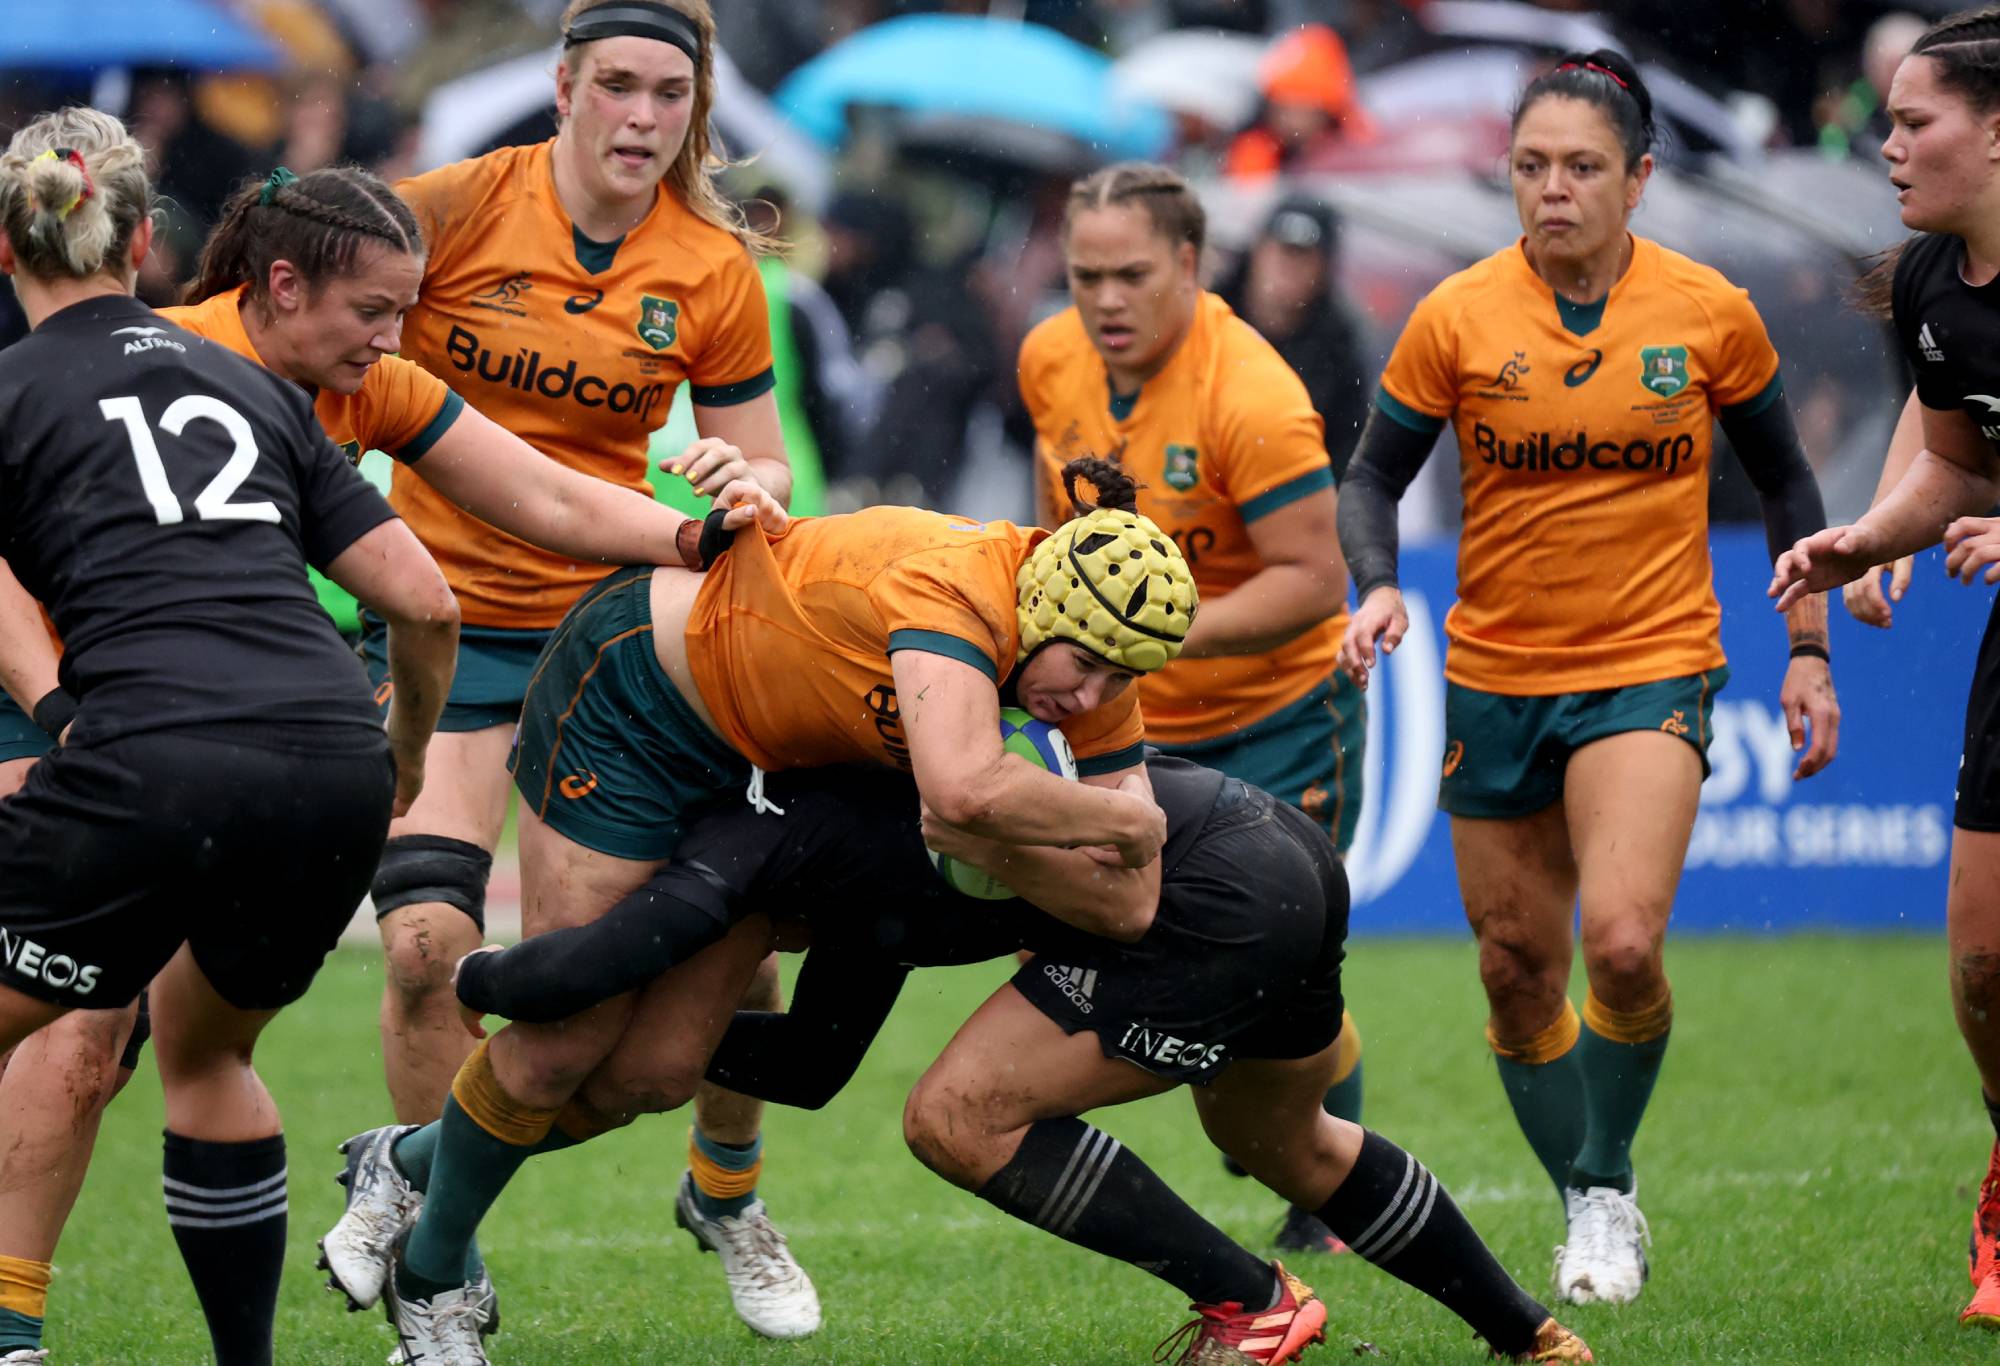 Shannon Parry of Australia charges forward during the 2022 Pacific Four Series match between New Zealand Black Ferns and Australia Wallaroos at Tauranga Domain on June 6, 2022 in Tauranga, New Zealand. (Photo by Andy Jackson/Getty Images)